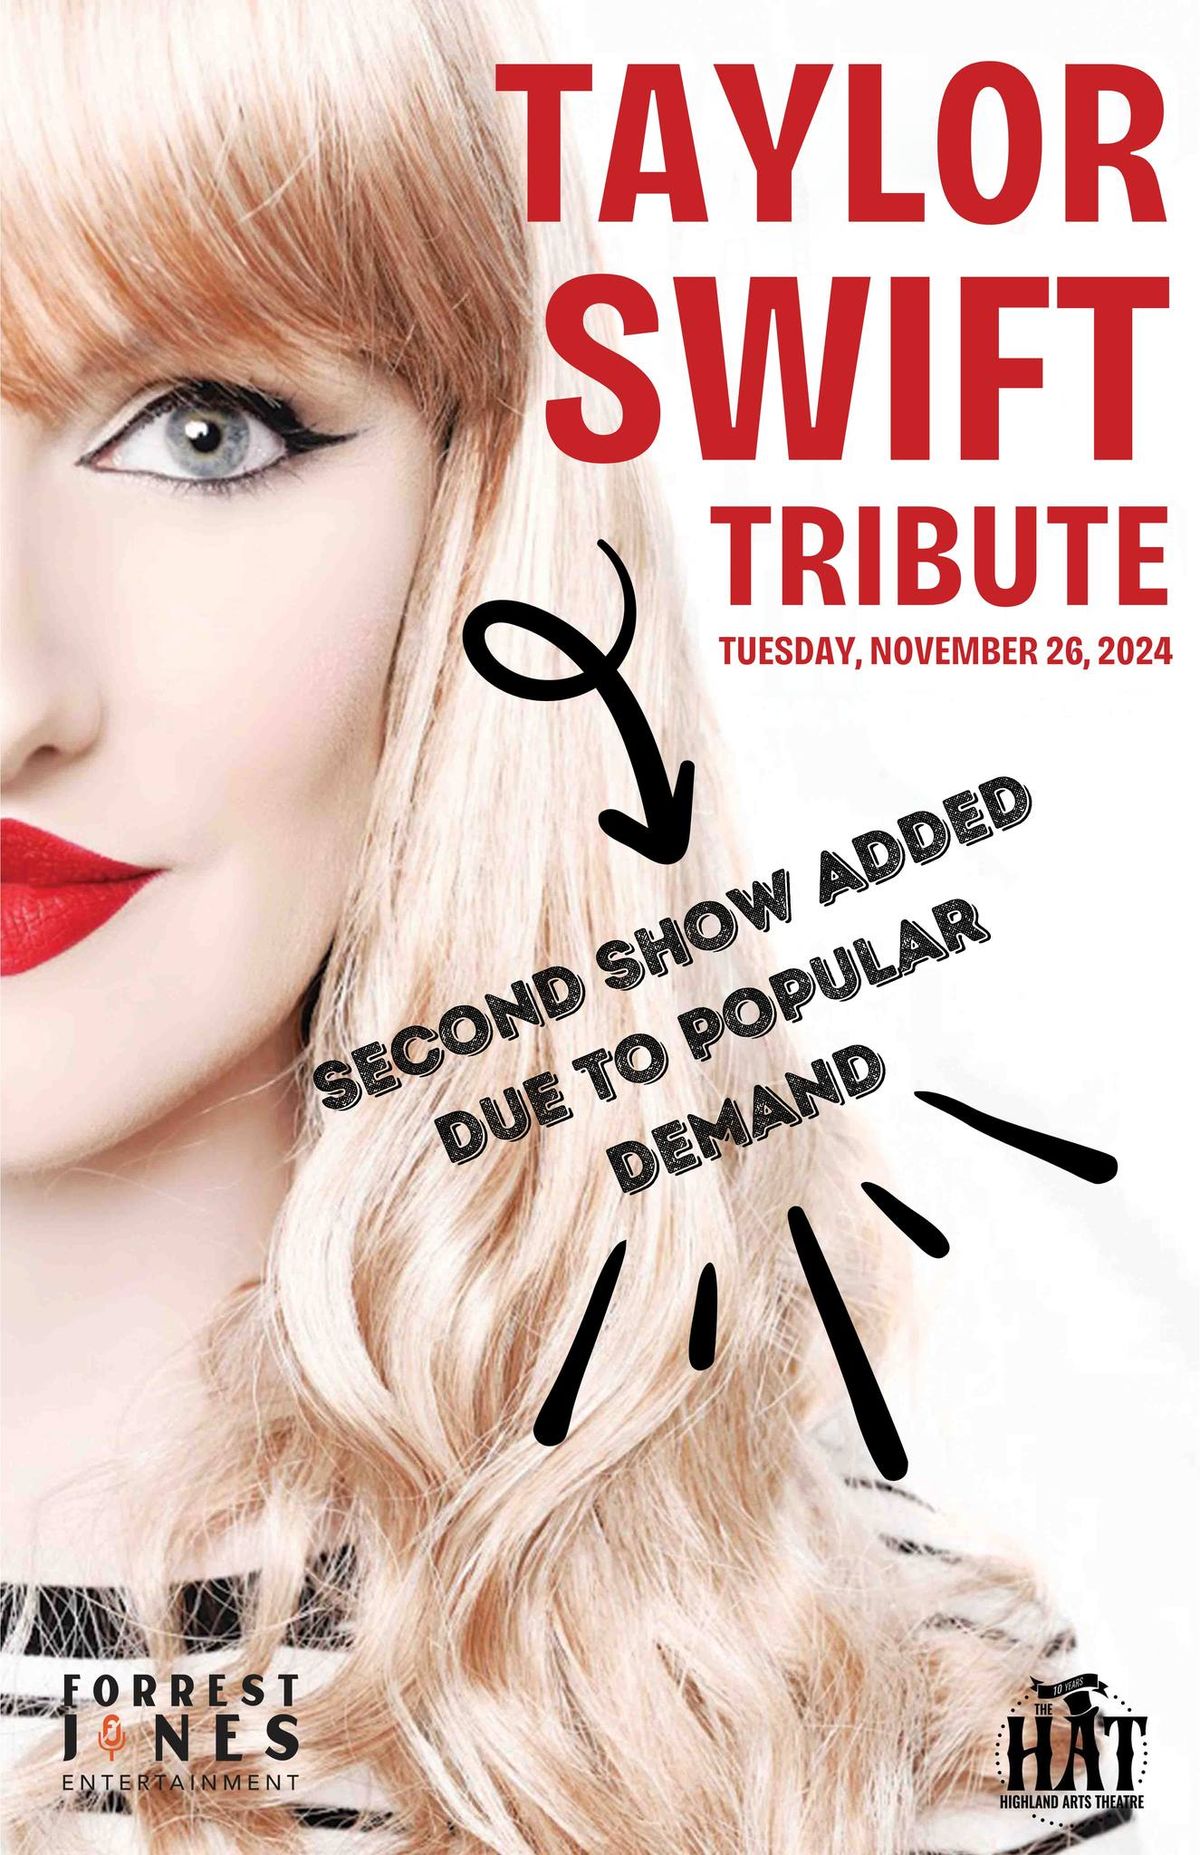 TAYLOR SWIFT TRIBUTE PARTY - HIGHLAND ARTS THEATRE - SYDNEY, NS - 2ND SHOW 